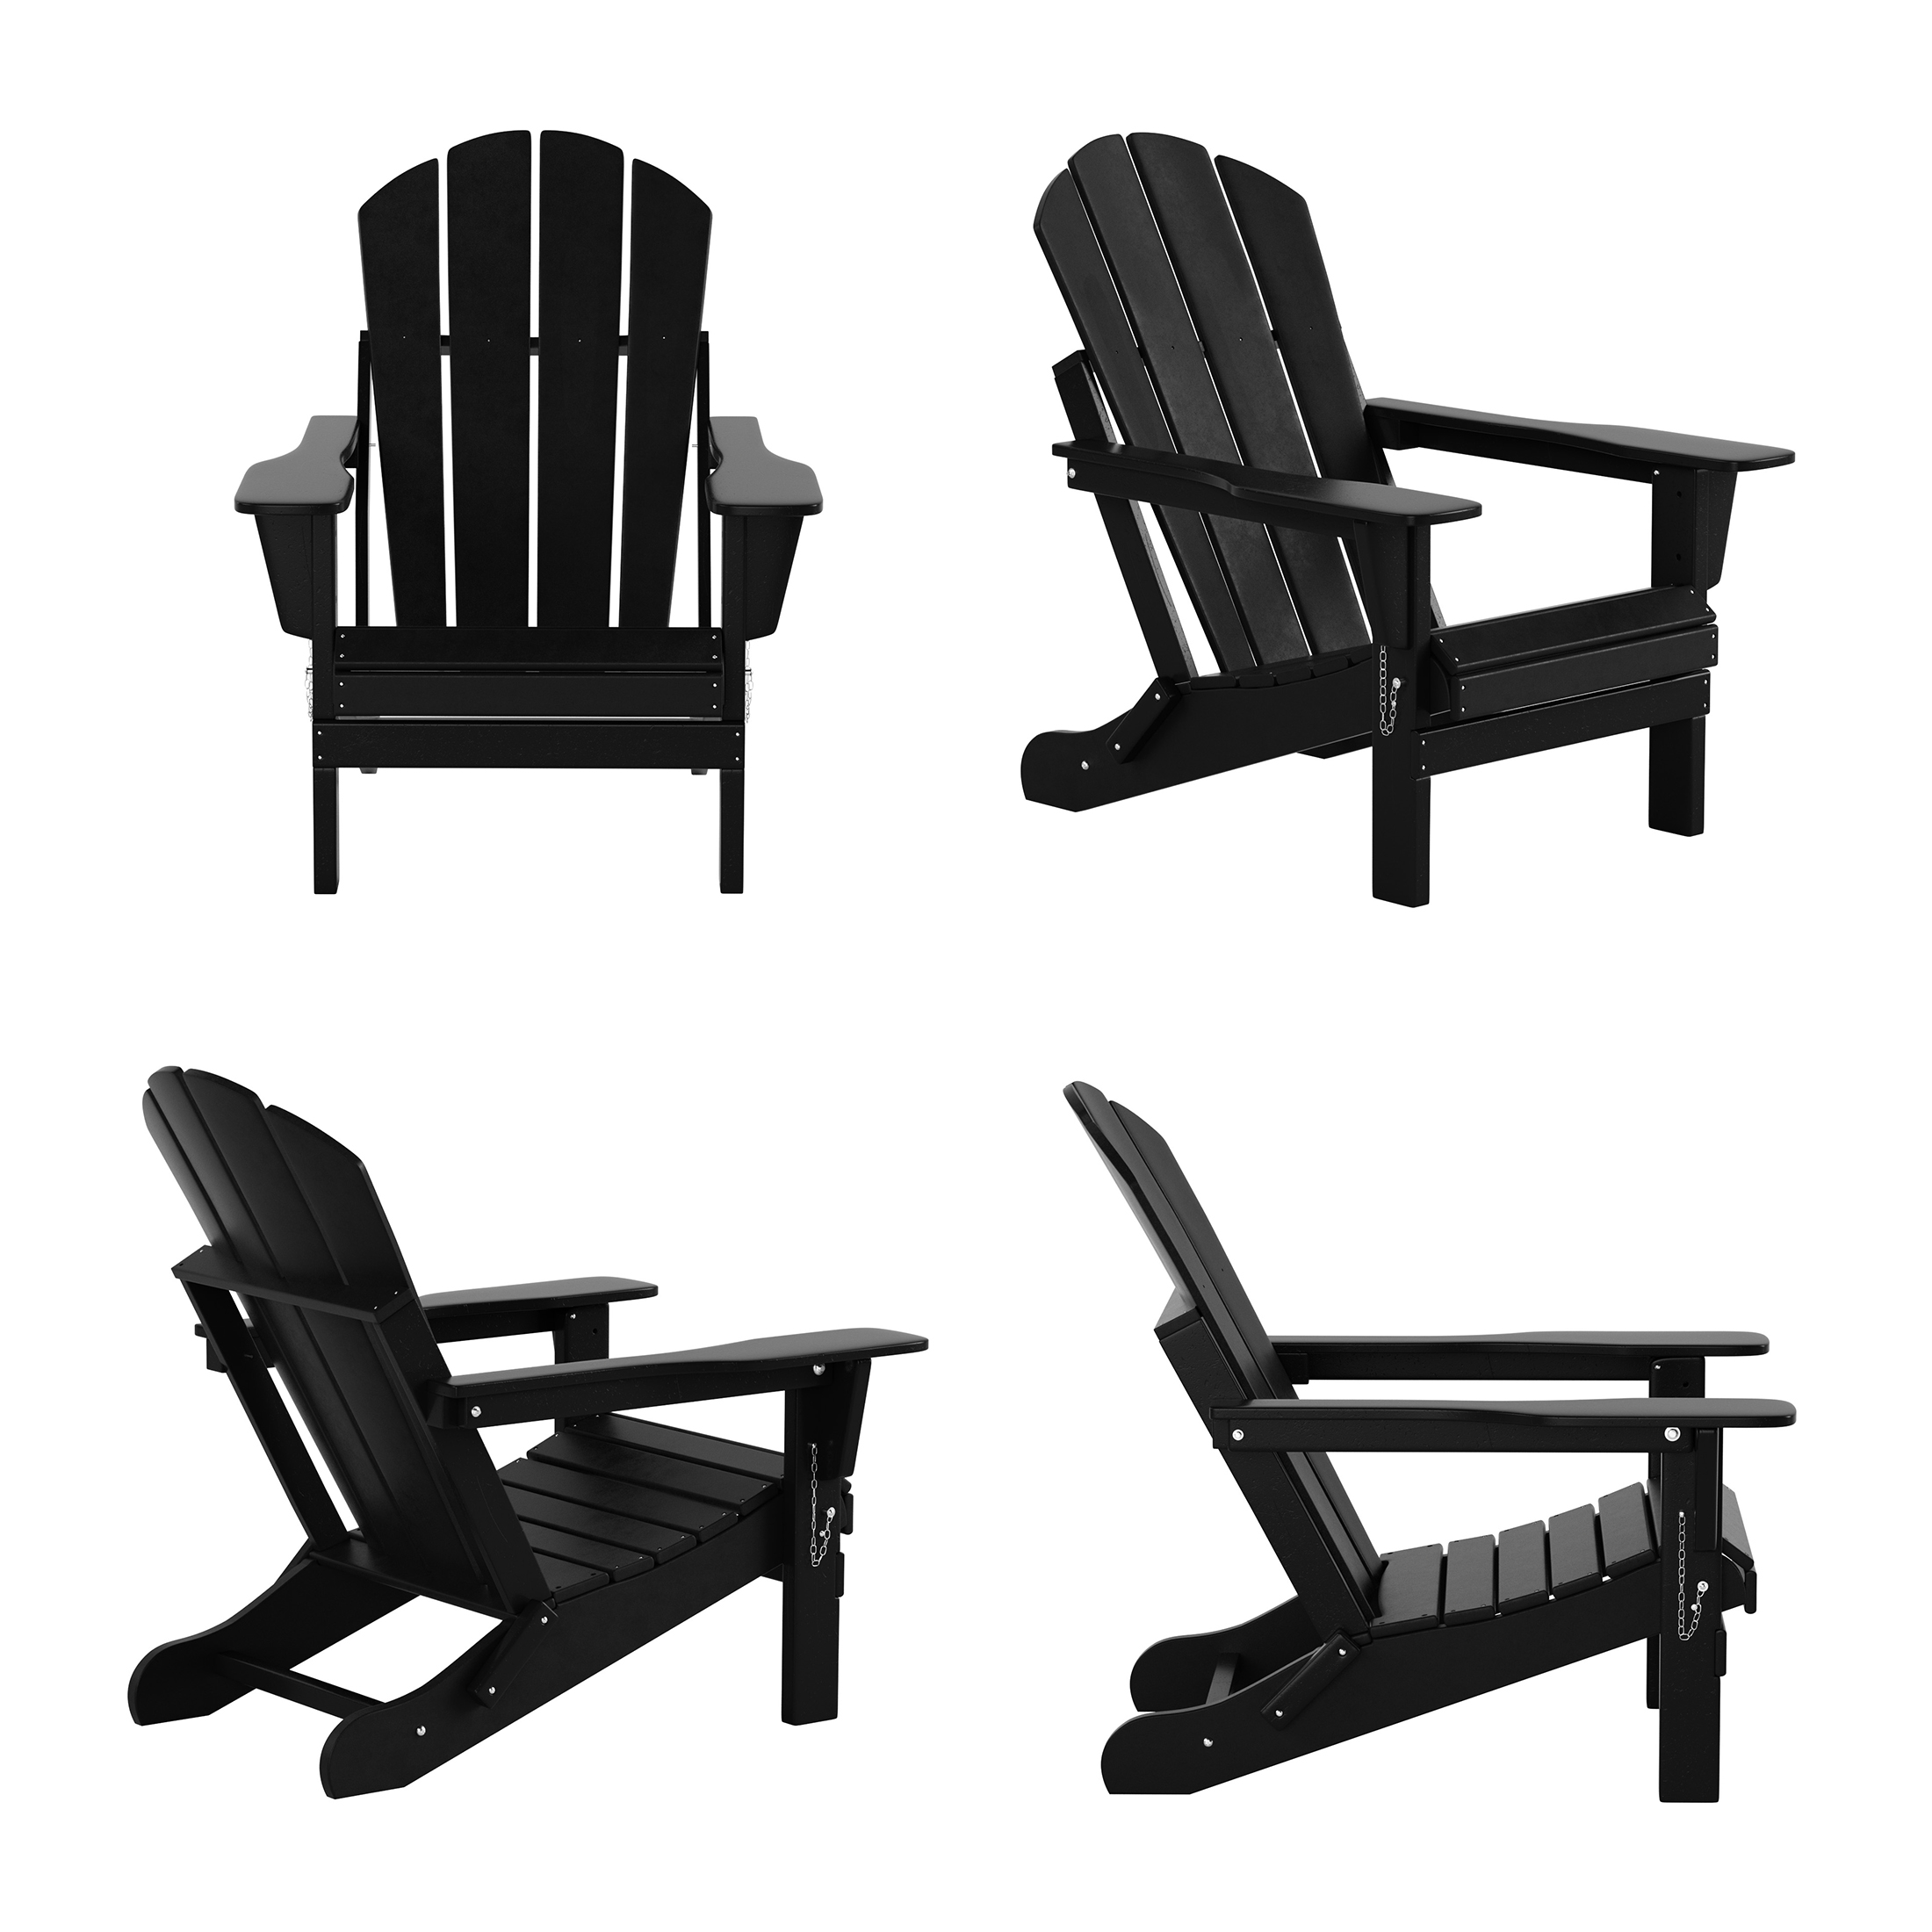 WestinTrends Malibu Outdoor Lounge Chairs, 3-Pieces Adirondack Chair Set with Ottoman and Side Table, All Weather Poly Lumber Patio Lawn Folding Chair for Outside Pool Garden Backyard, Black - image 4 of 7